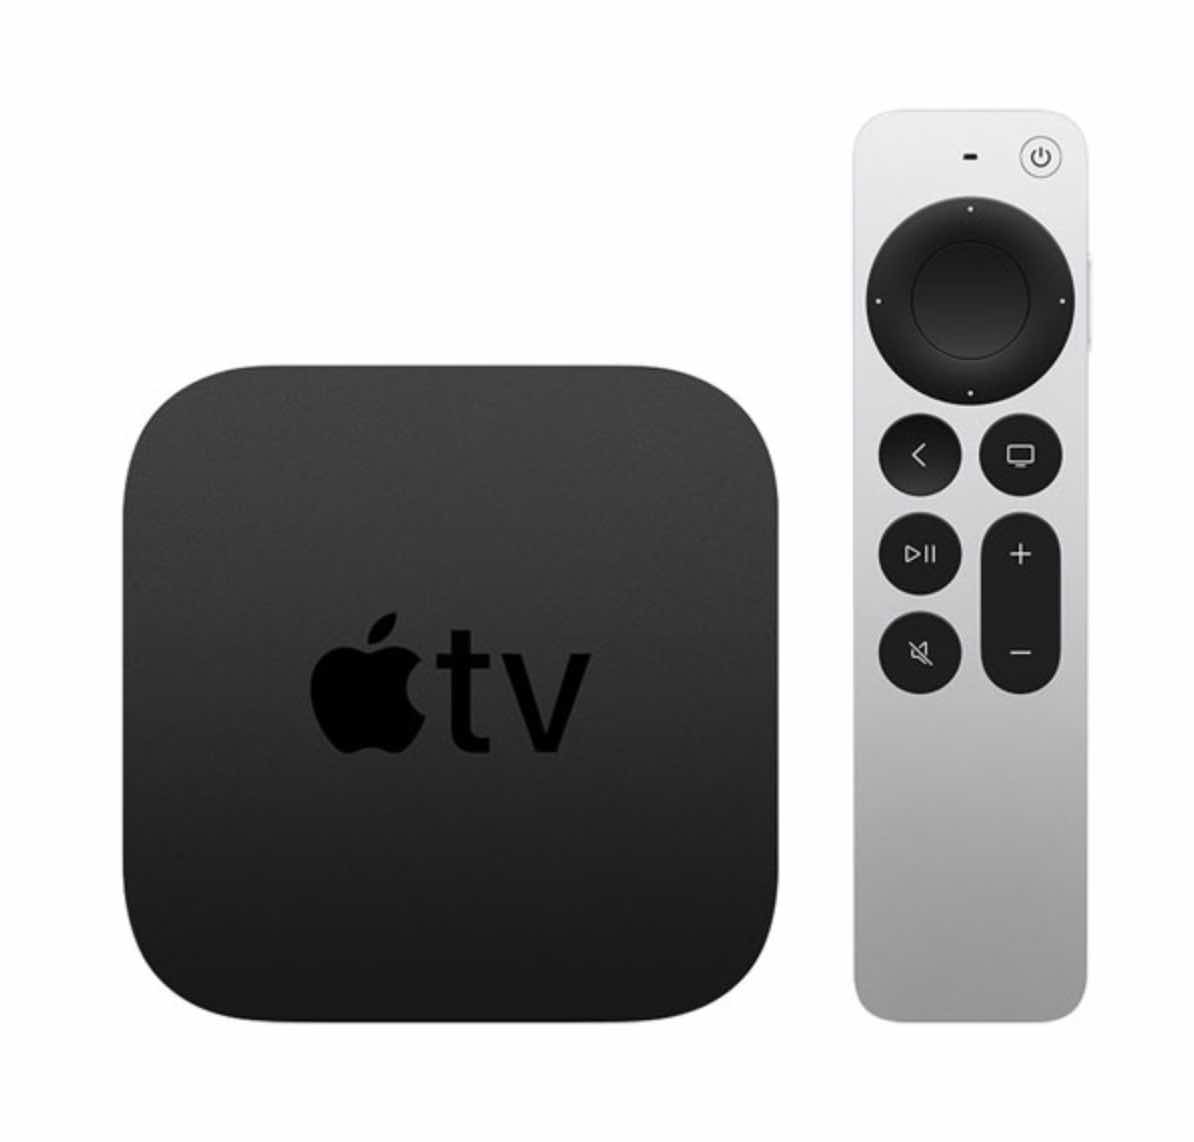 apple TV cut the cable cord